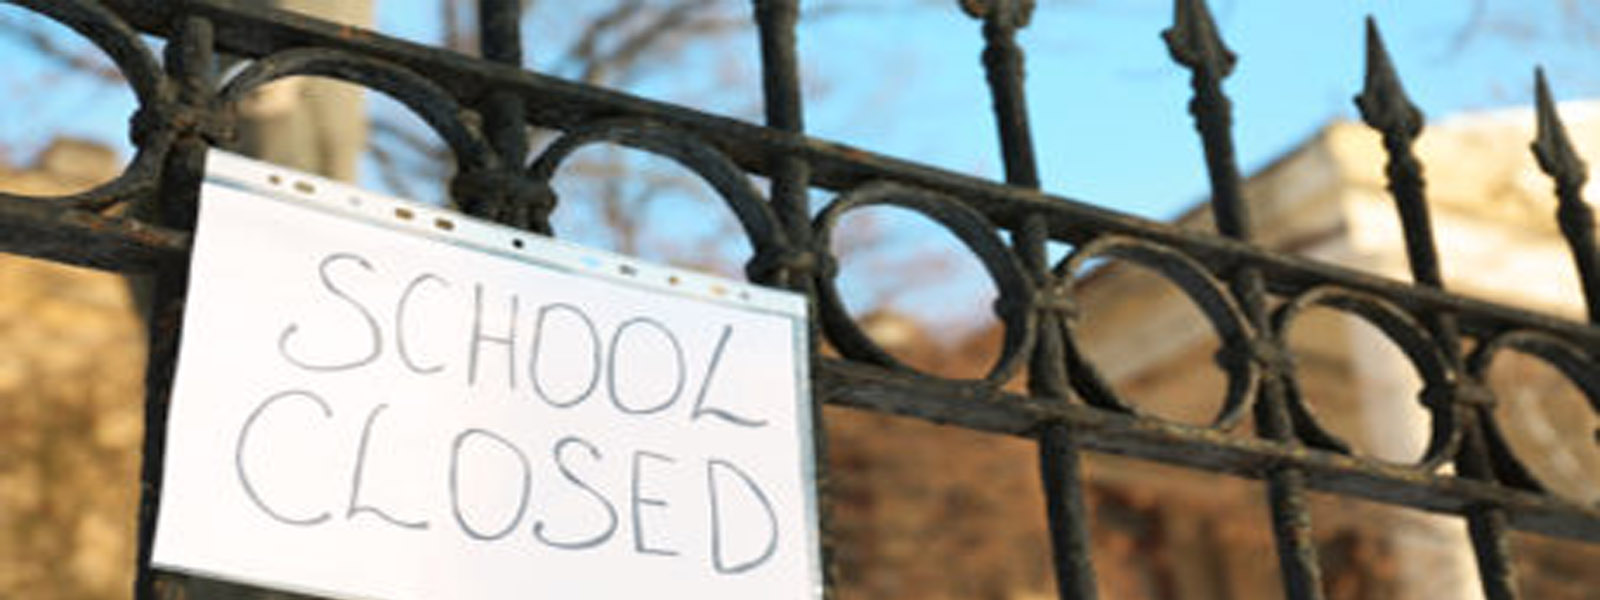 Several schools in Colombo closed on Oct. 7